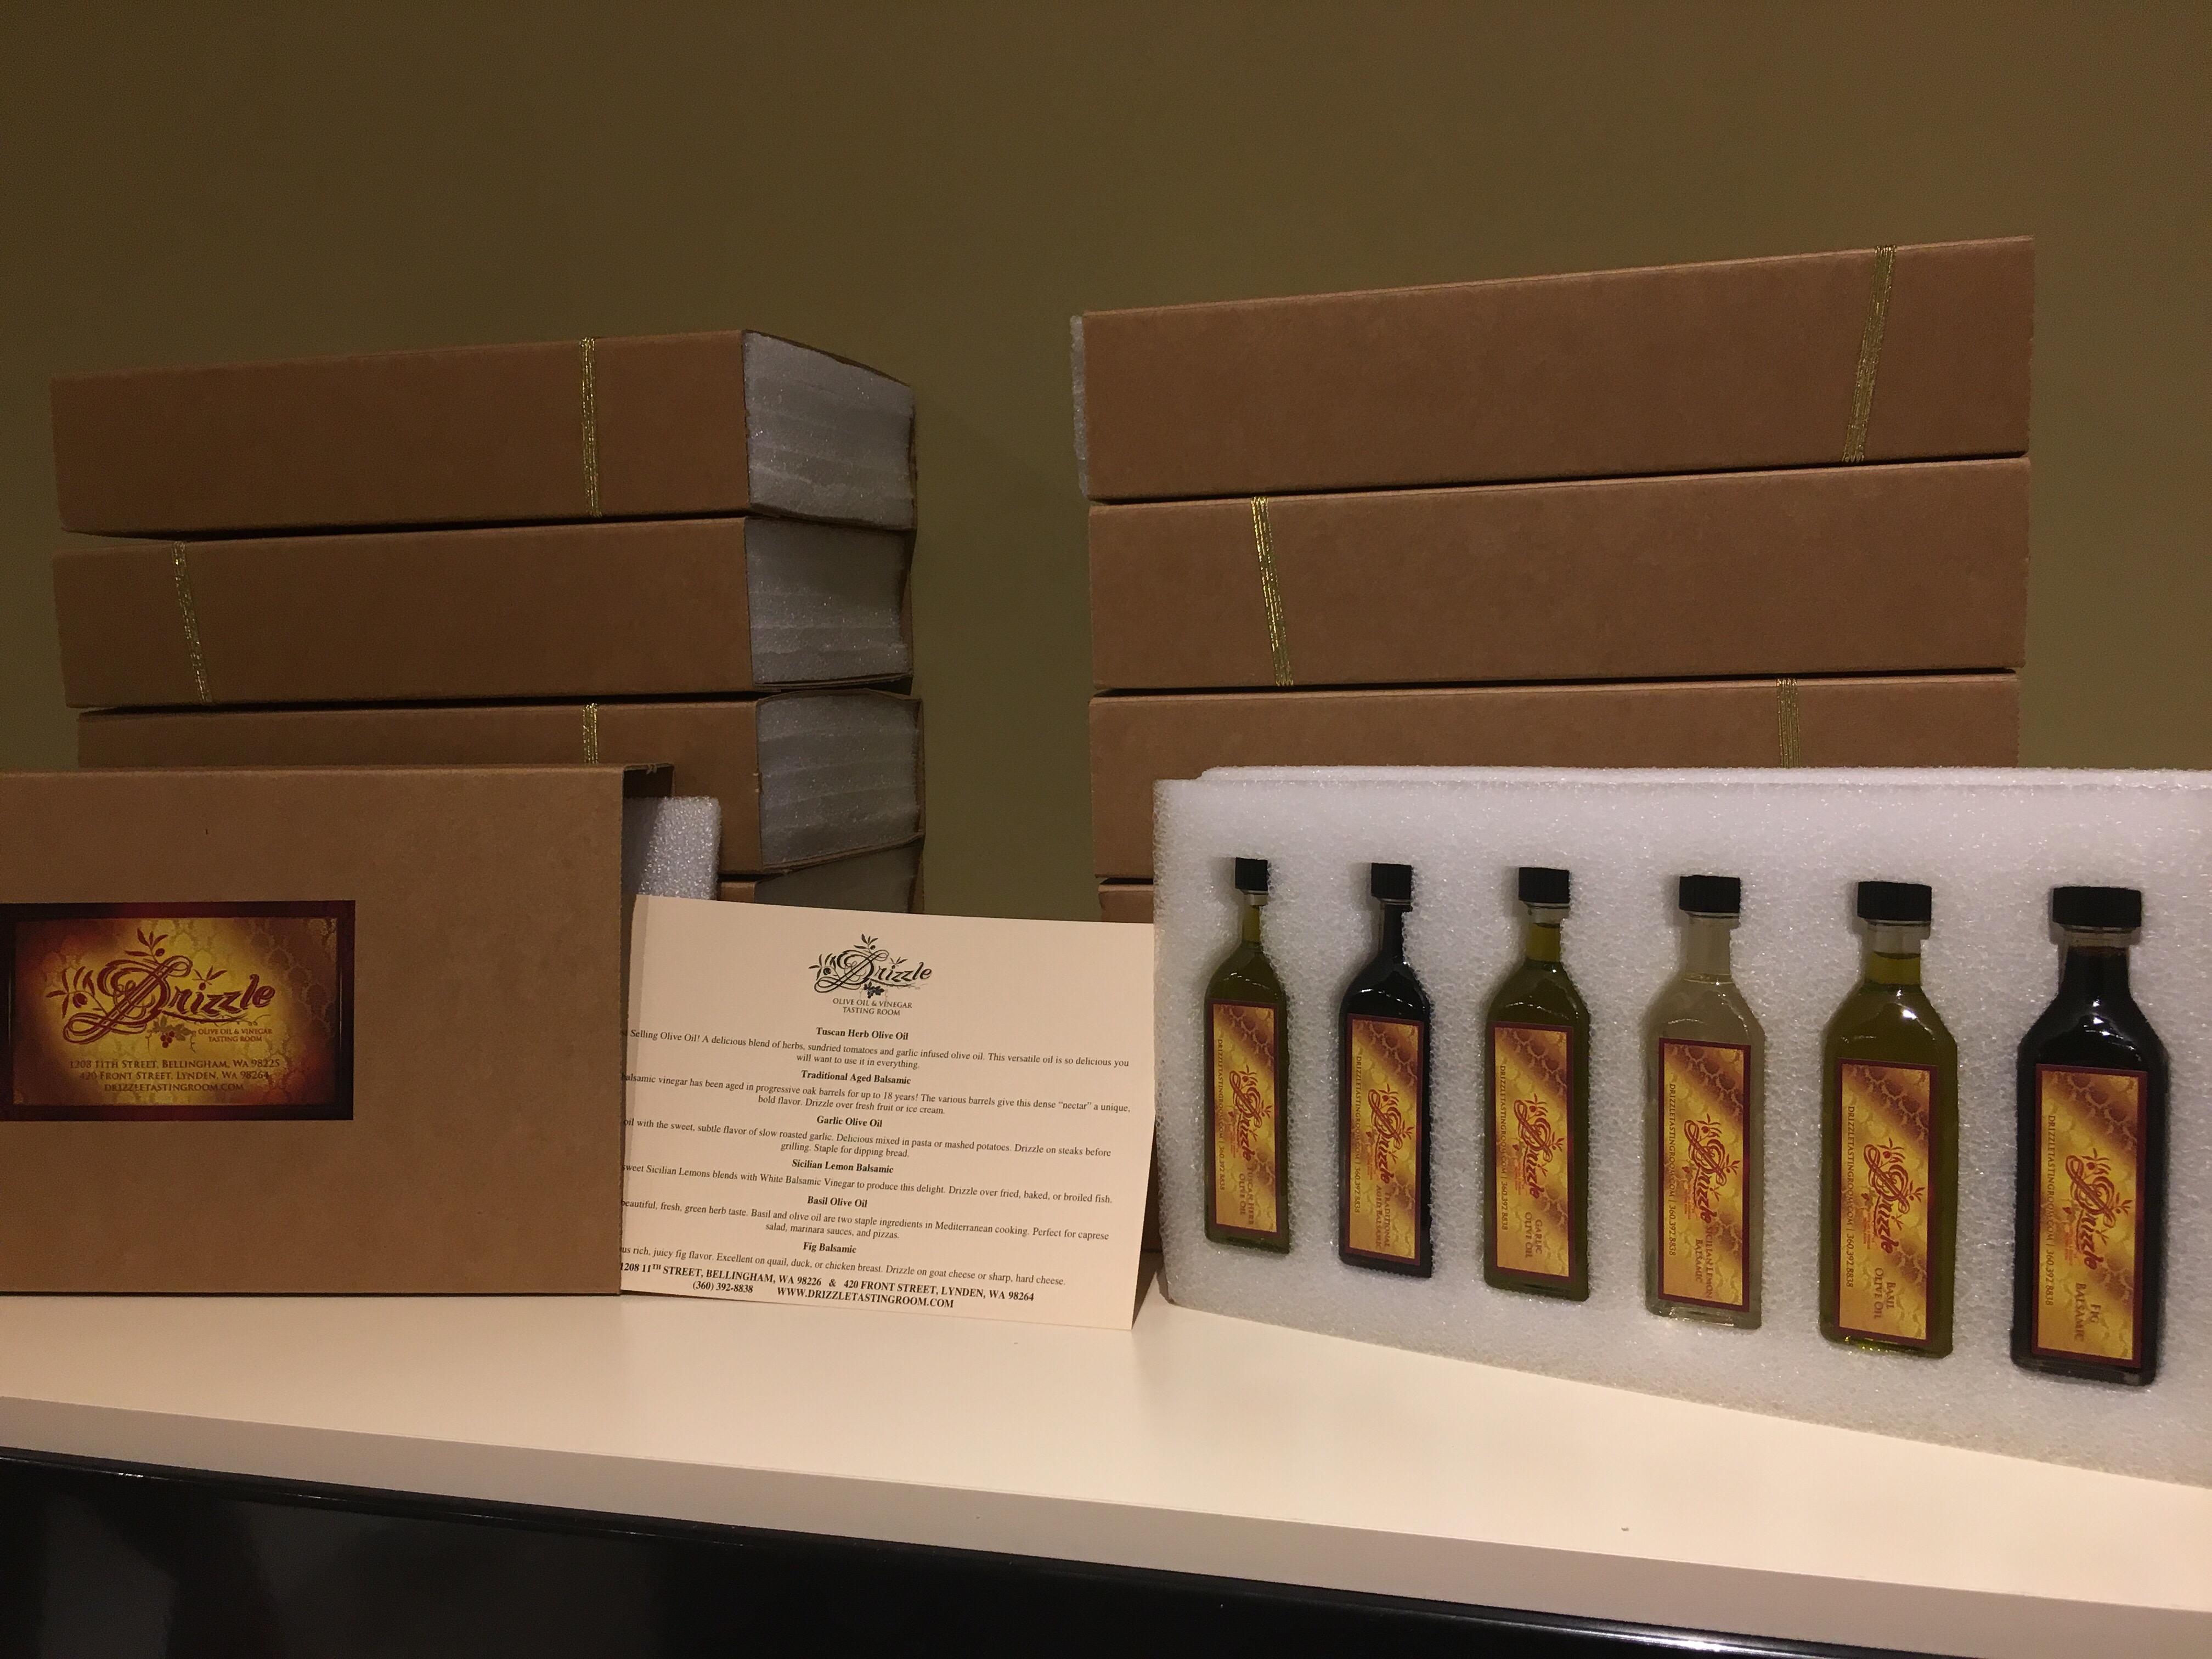 Drizzles popular "peoples choice" gift set: the top 6 oils and vinegars in a presentation gift box.